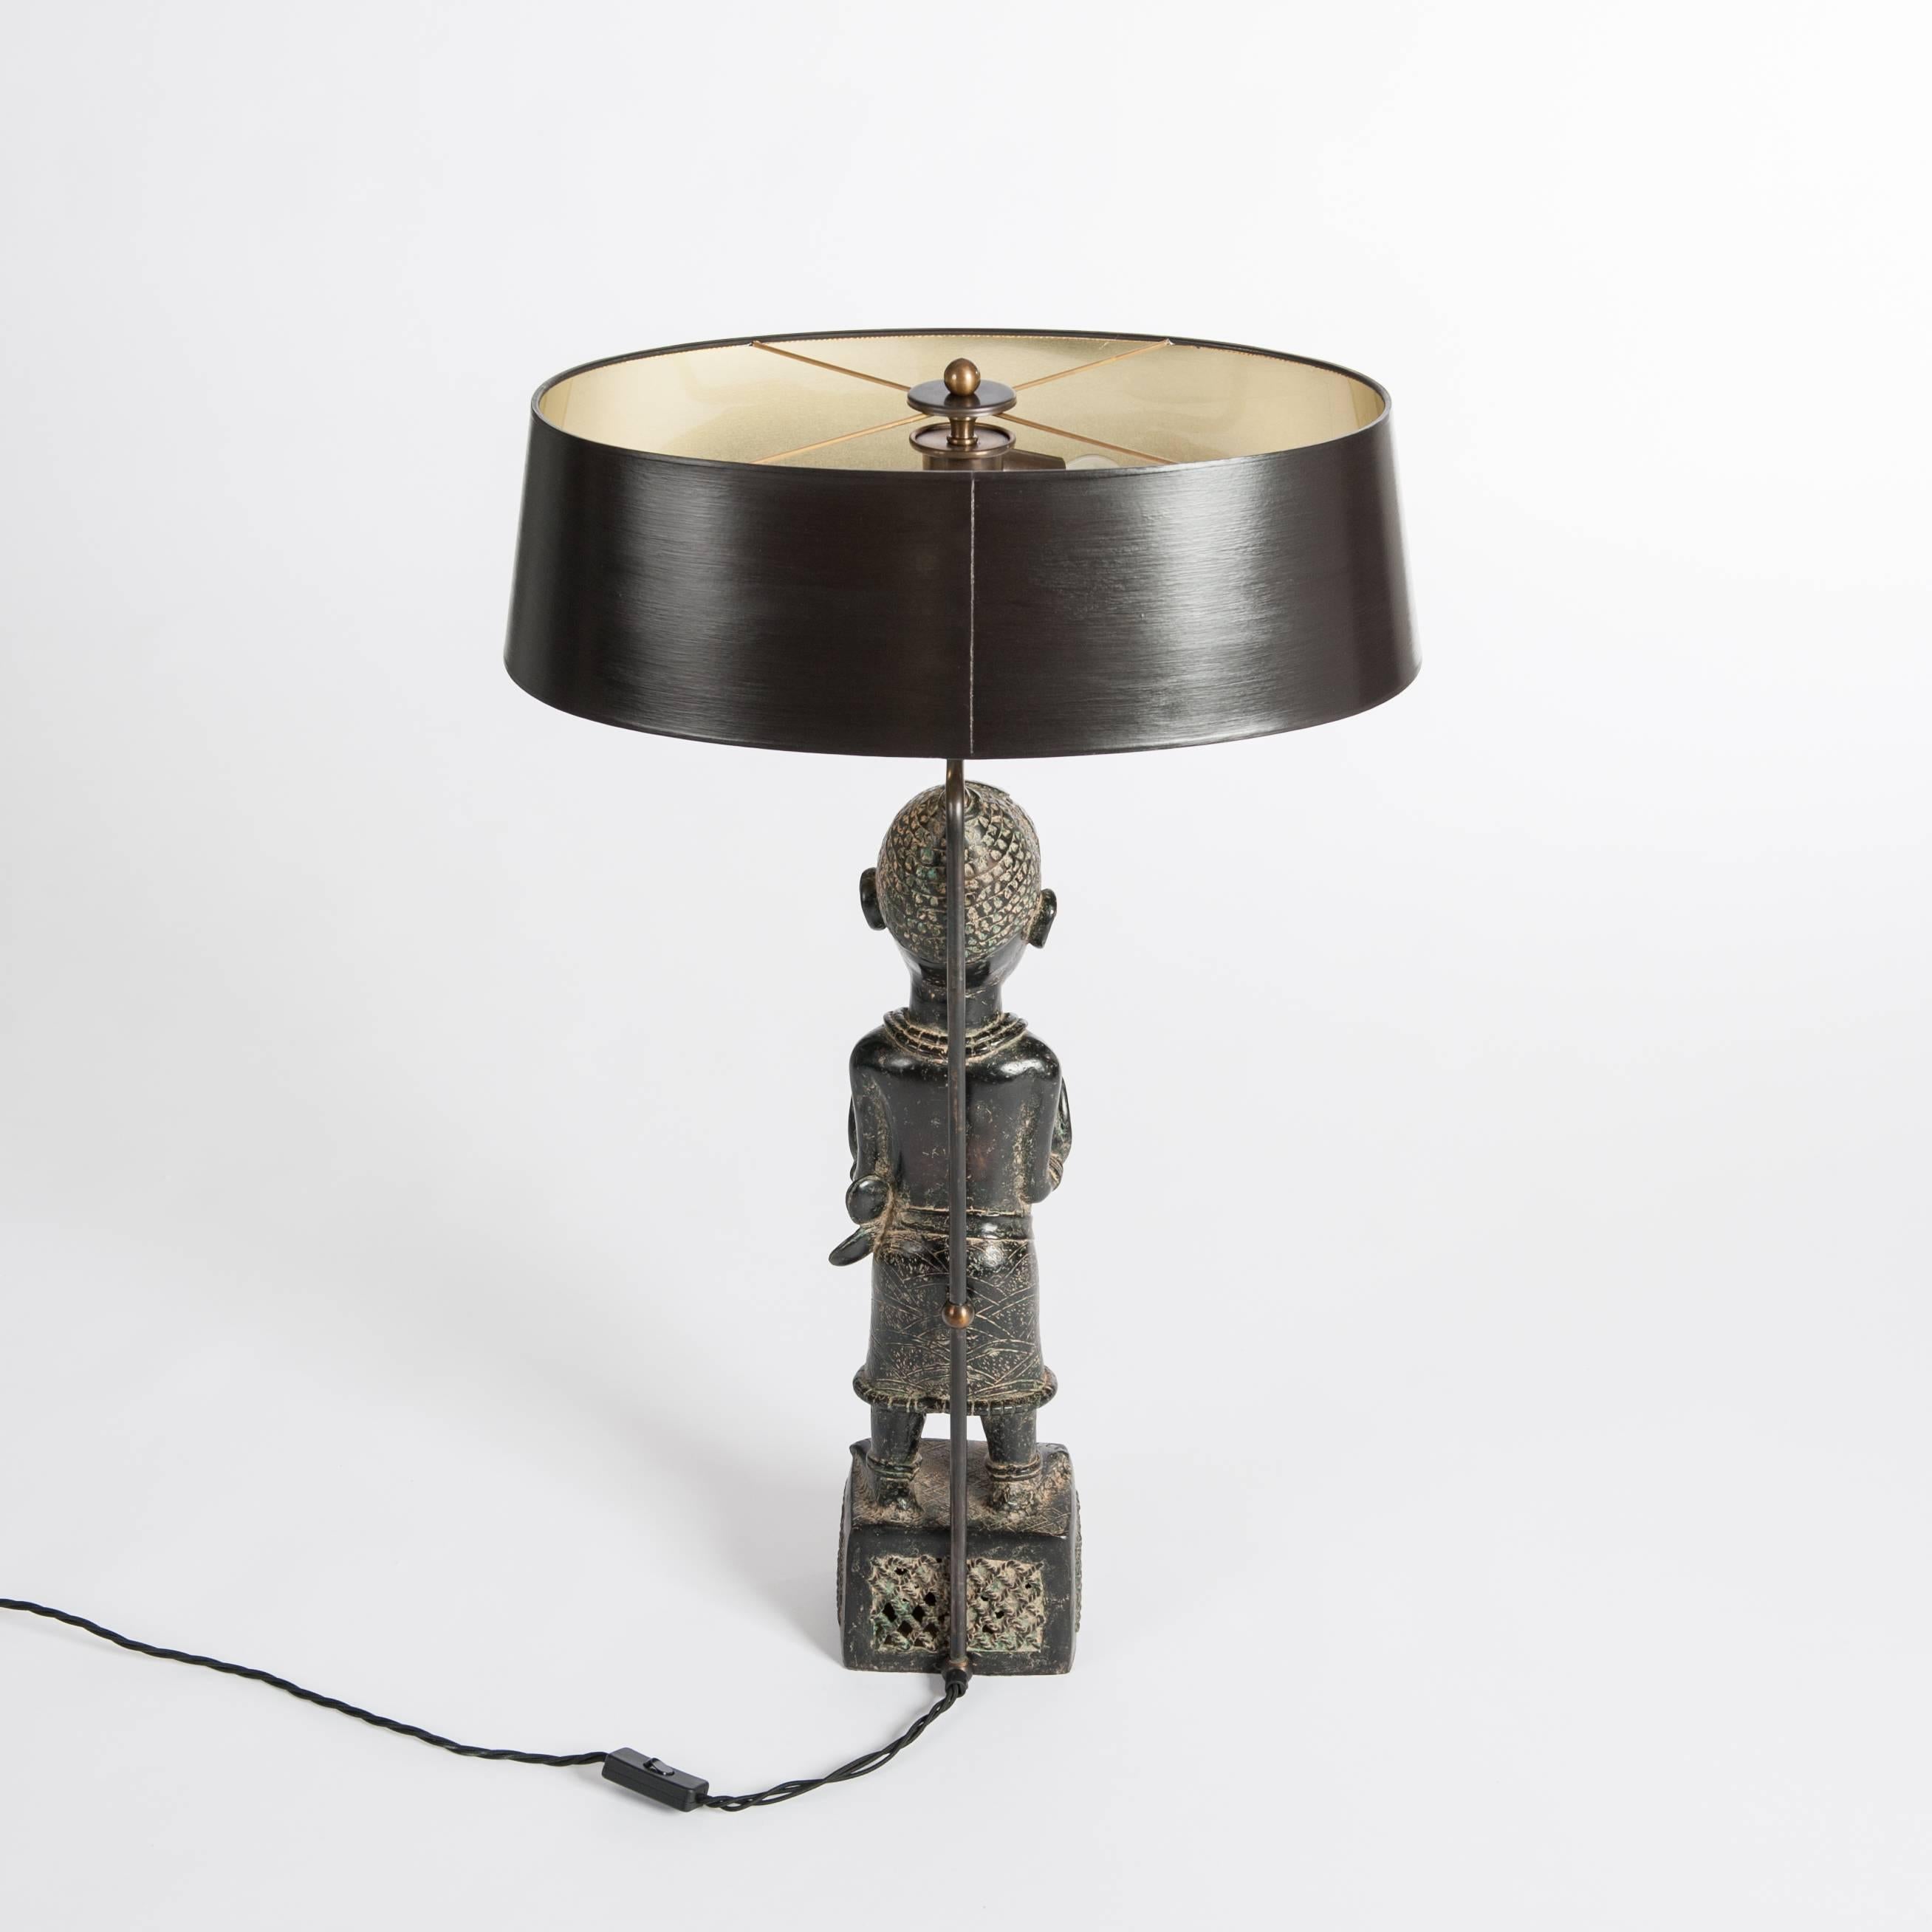 Cast Mid-Century Black Tribal African Table Lamp Purpose Built Construction and Shade